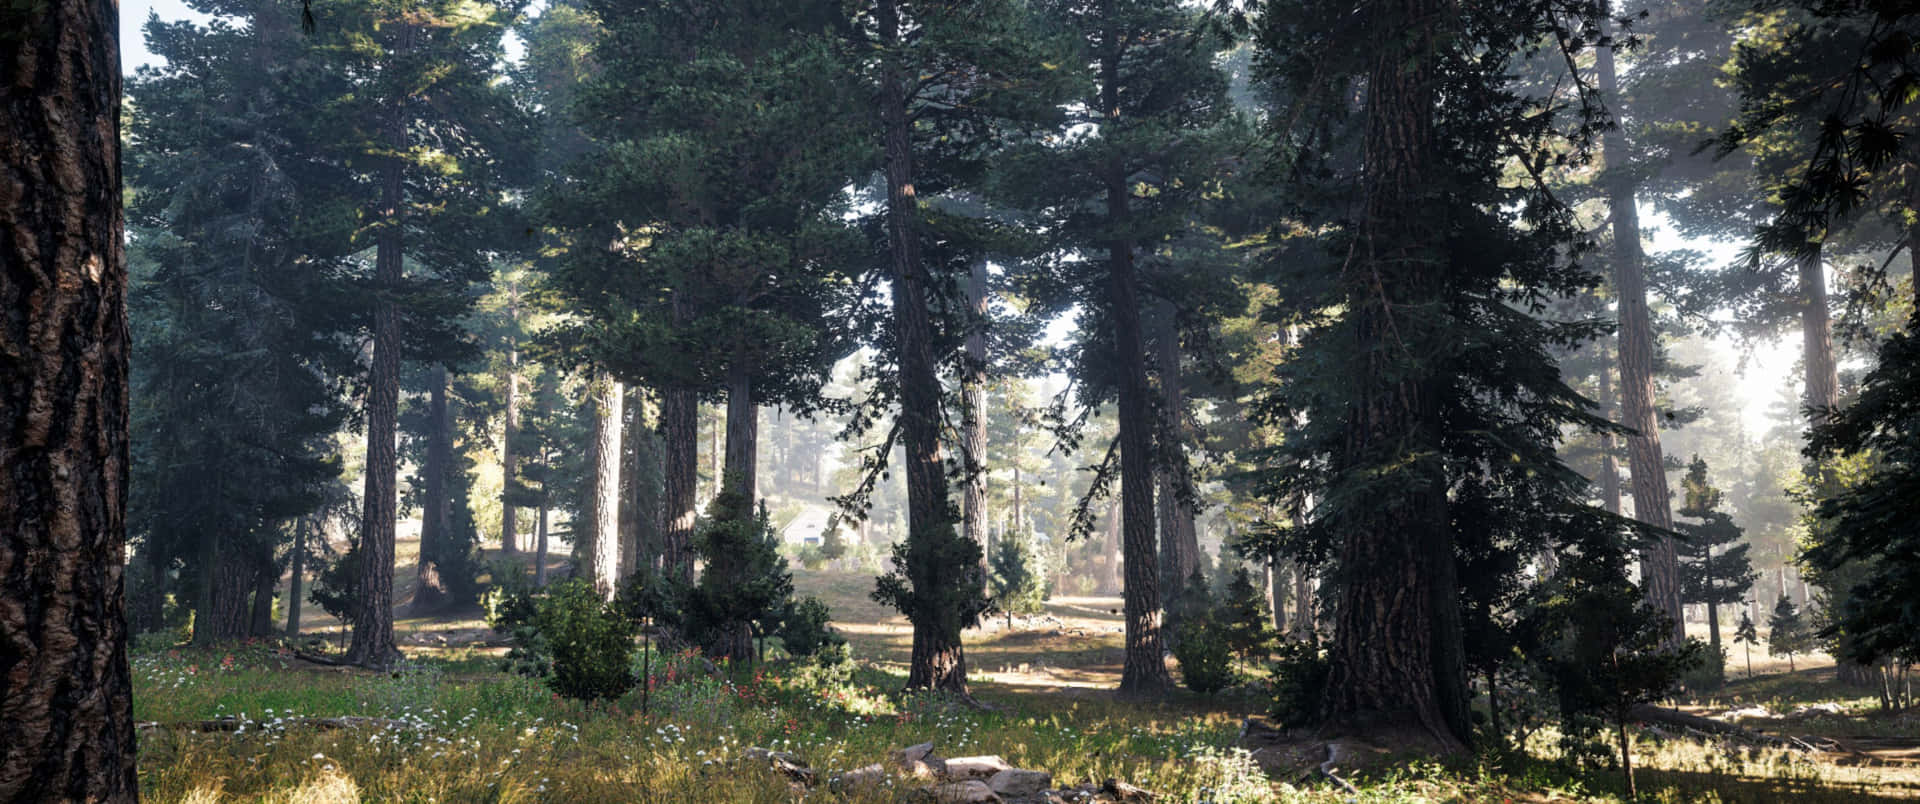 Far Cry 5 viewed in Incredible 3440x1440p resolution